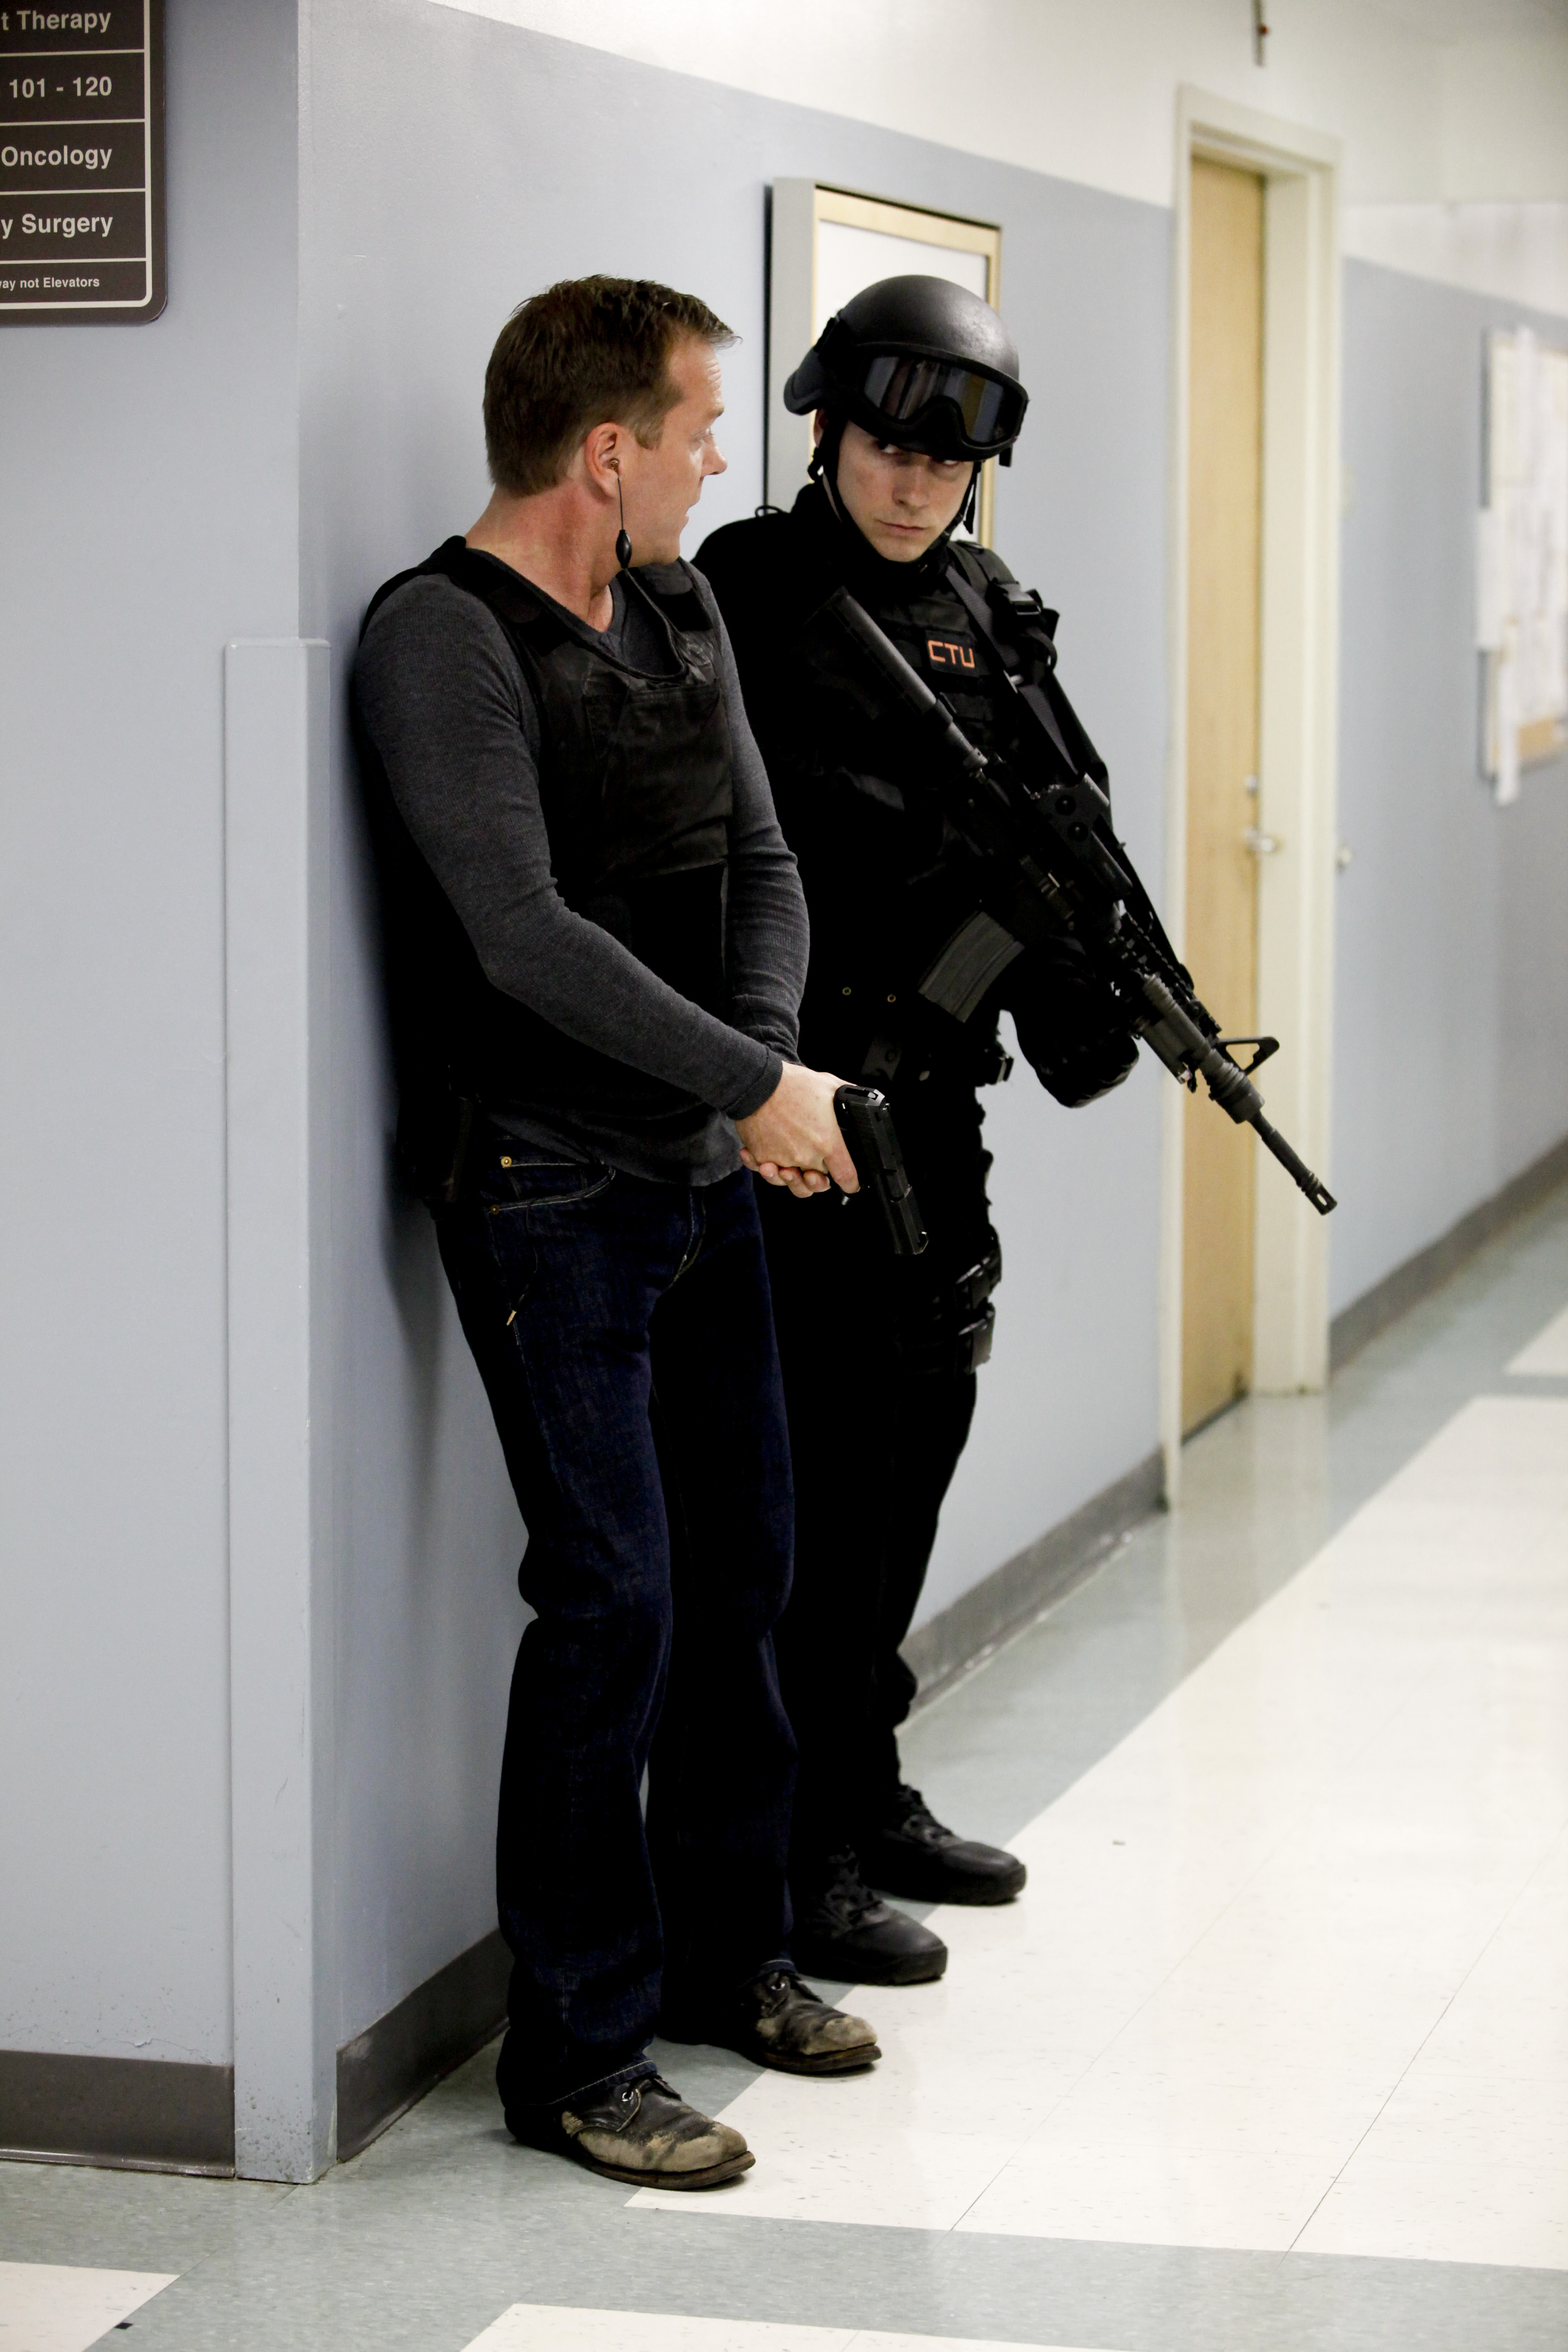 Still of Kiefer Sutherland and D.R. Lewis in 24